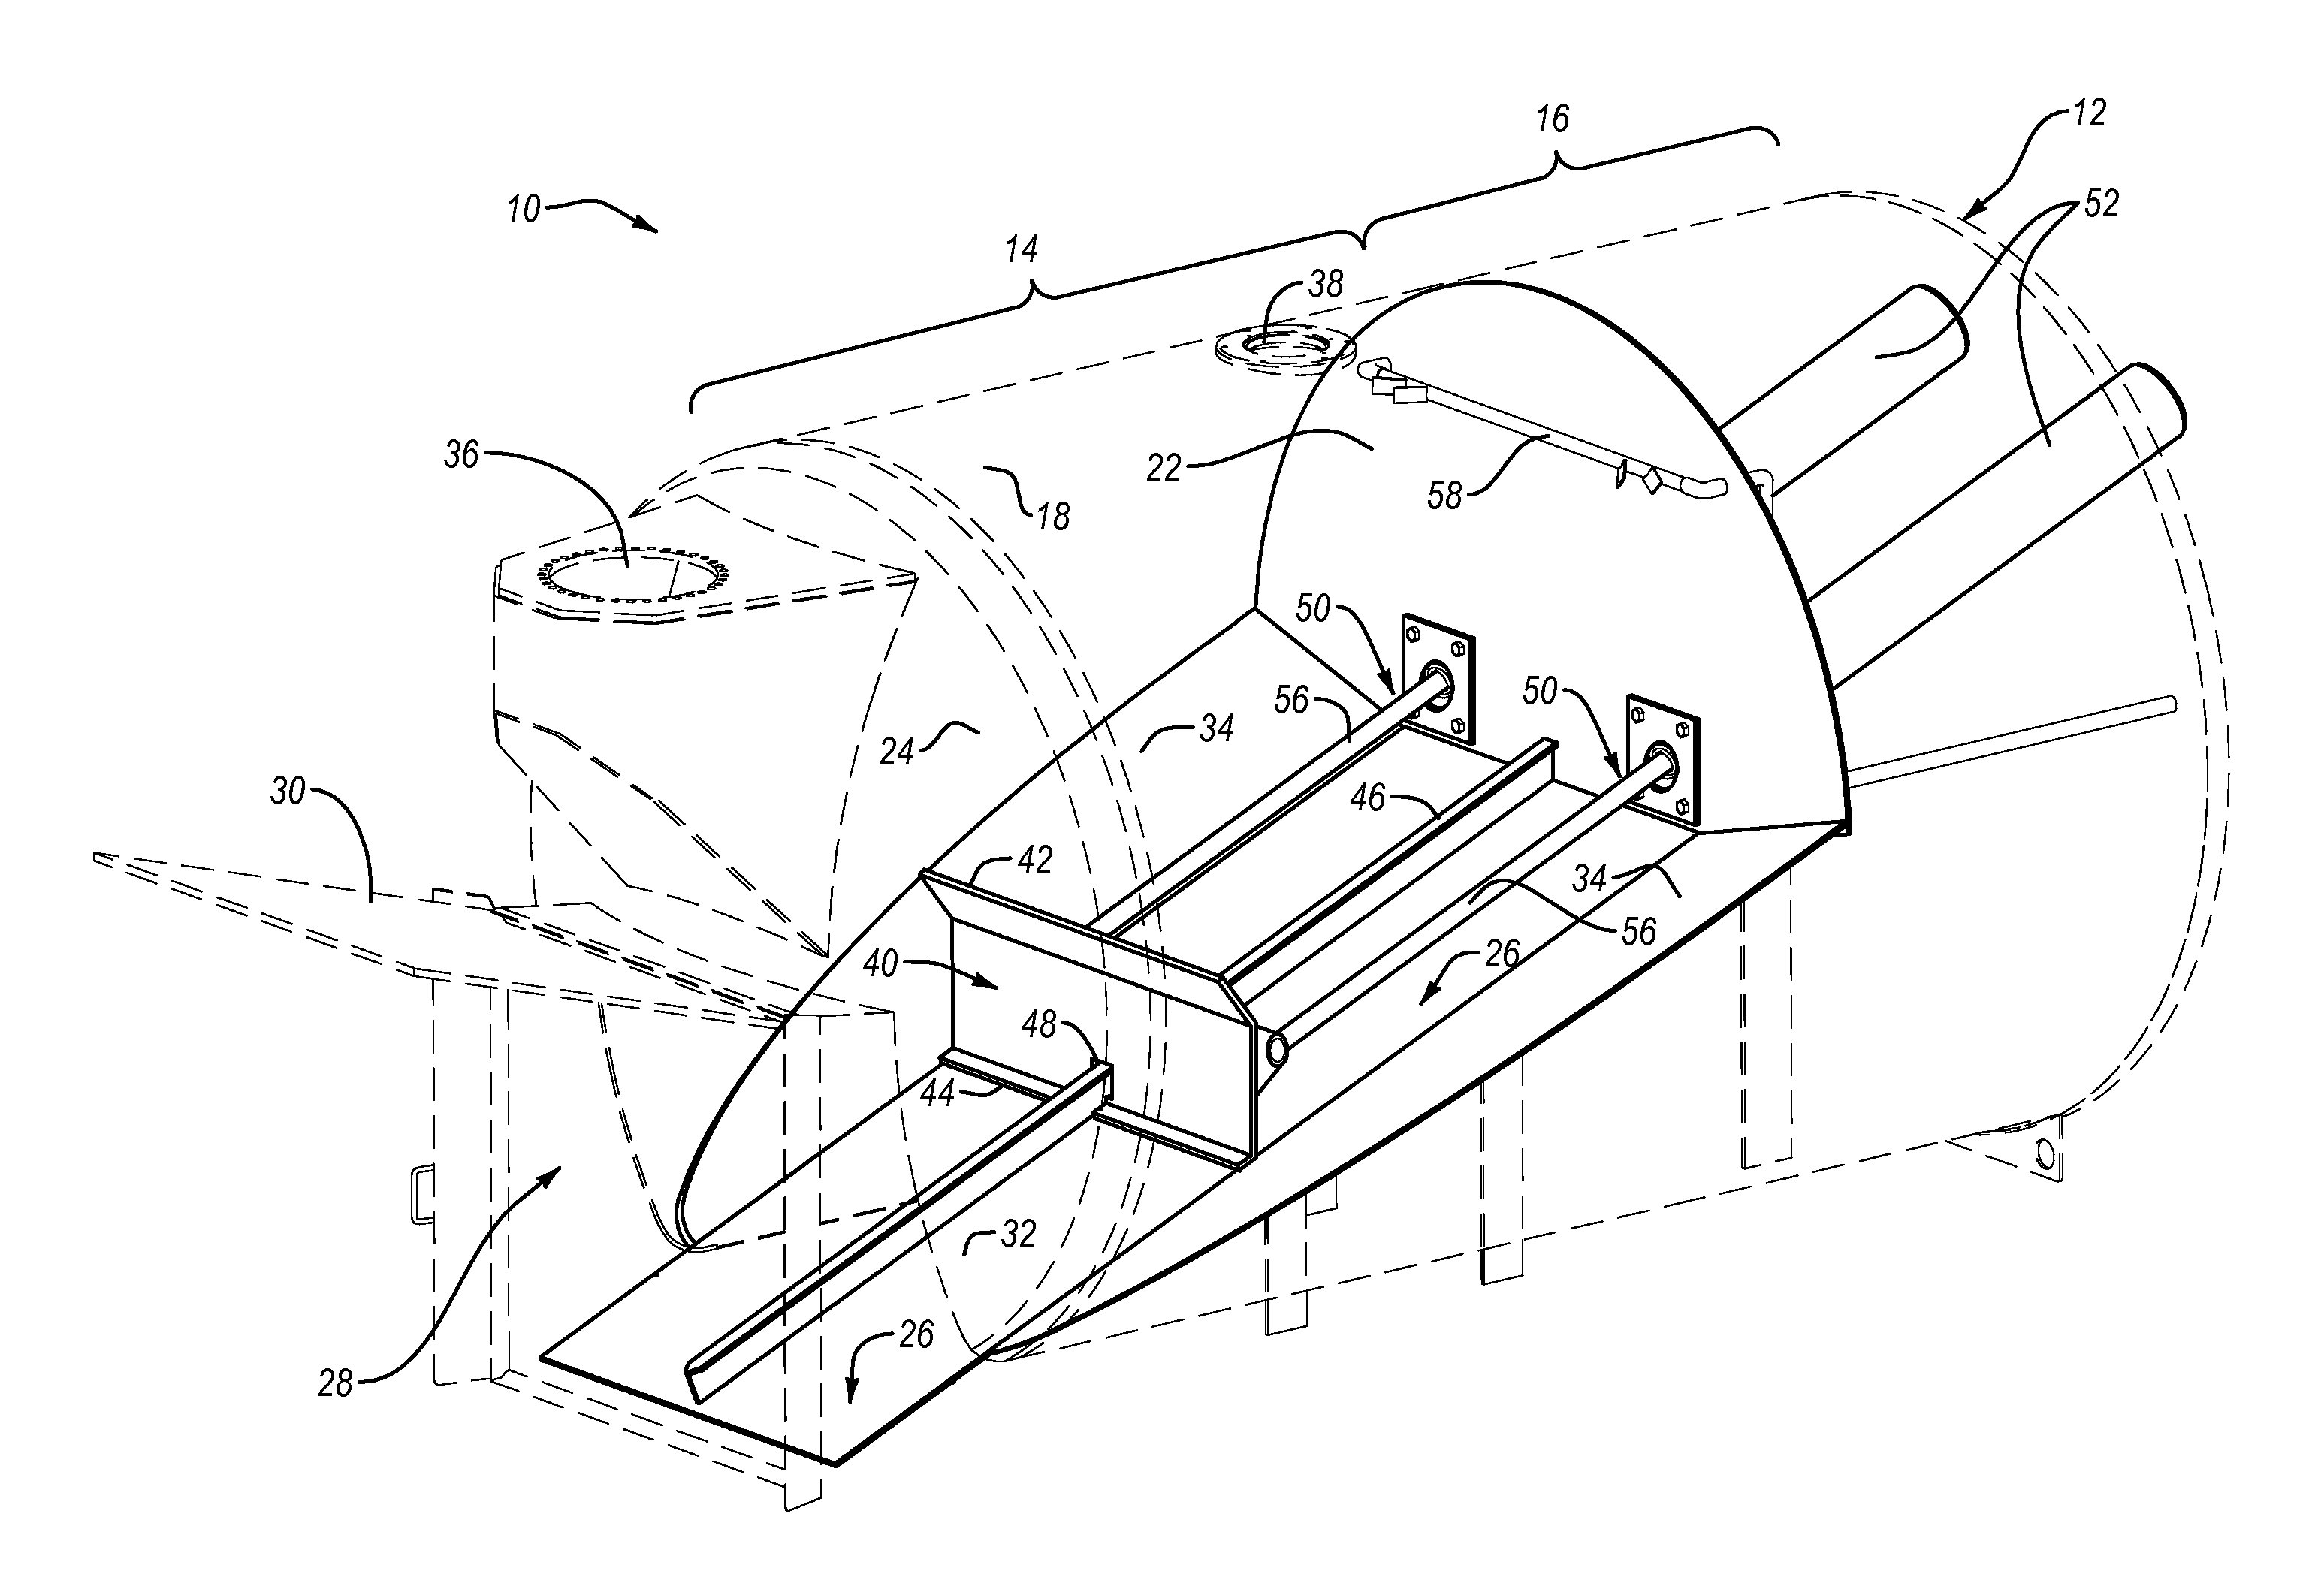 Systems and devices for removing materials from vacuum truck tanks